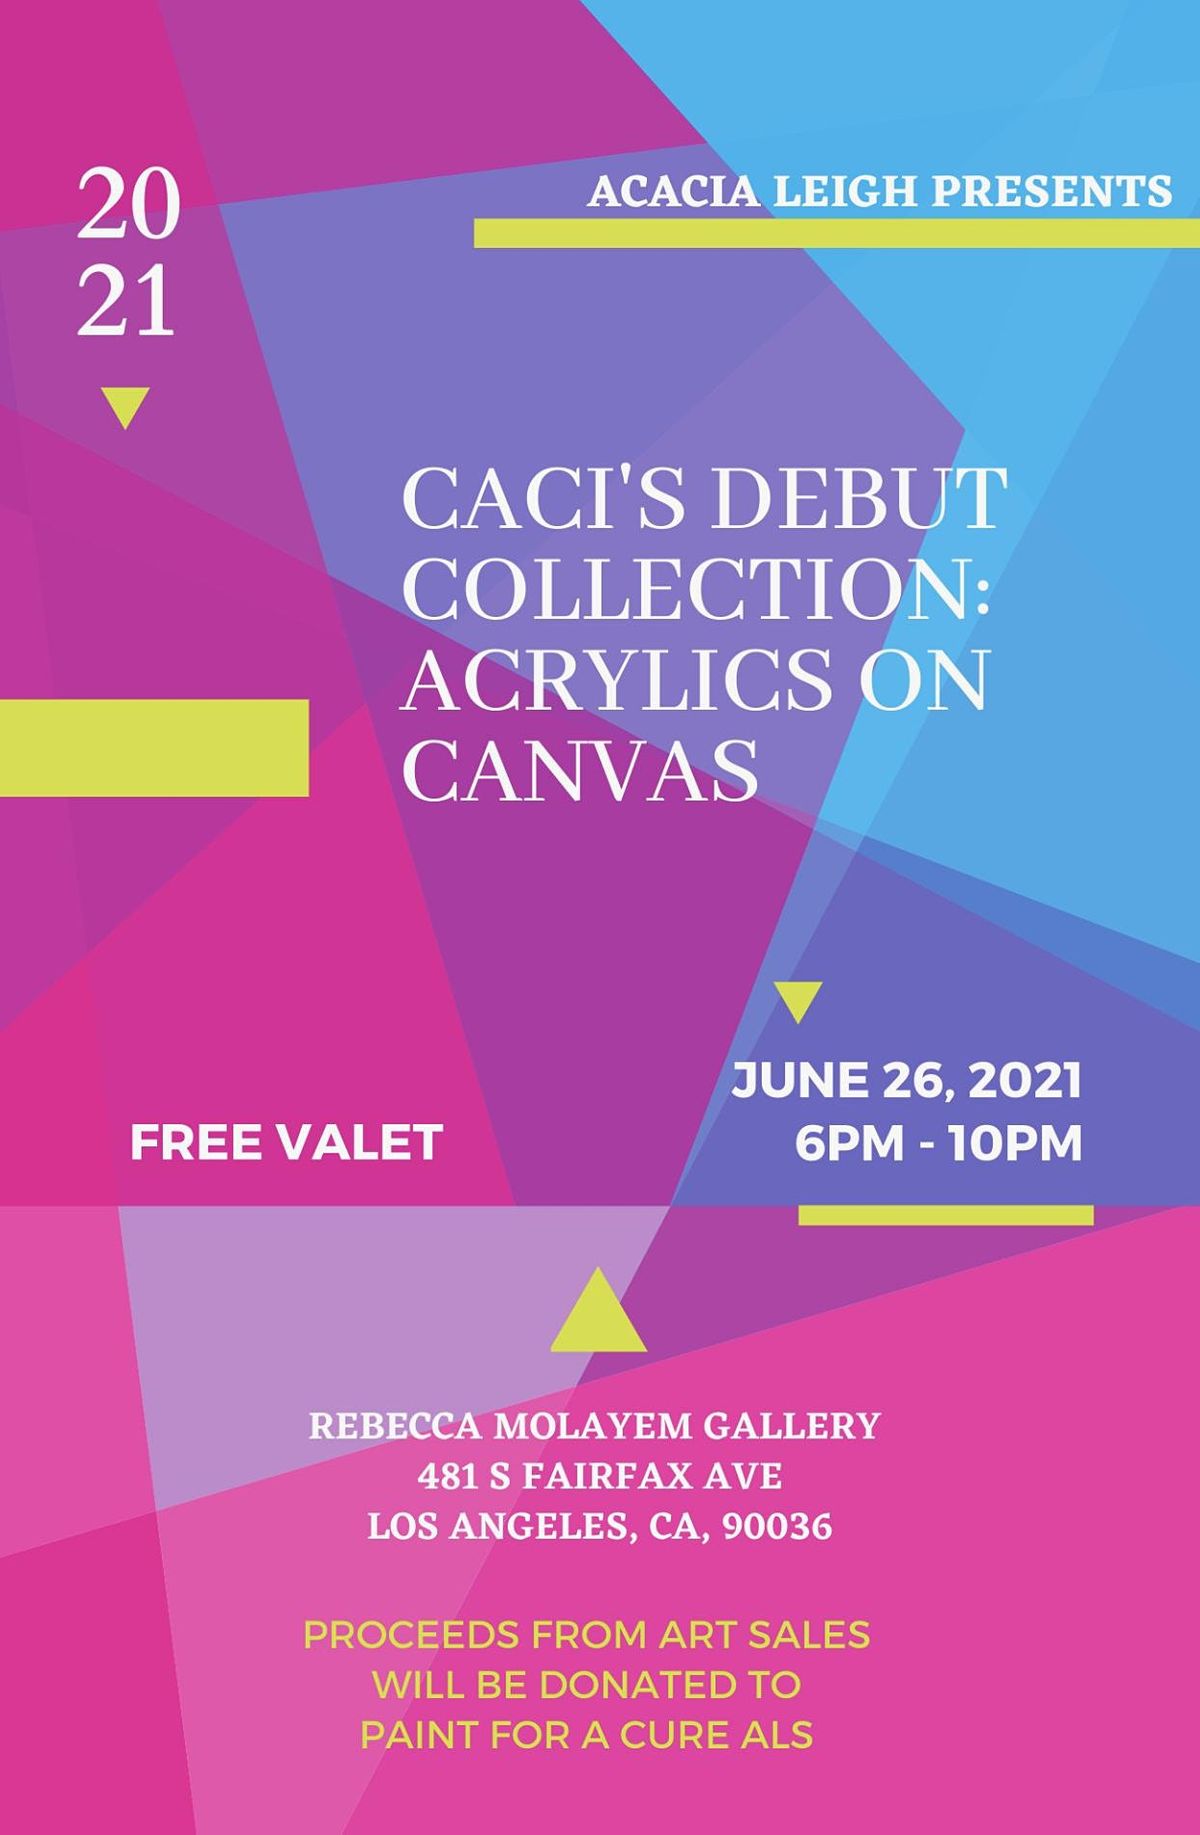 Caci's Debut Collection: Acrylics On Canvas